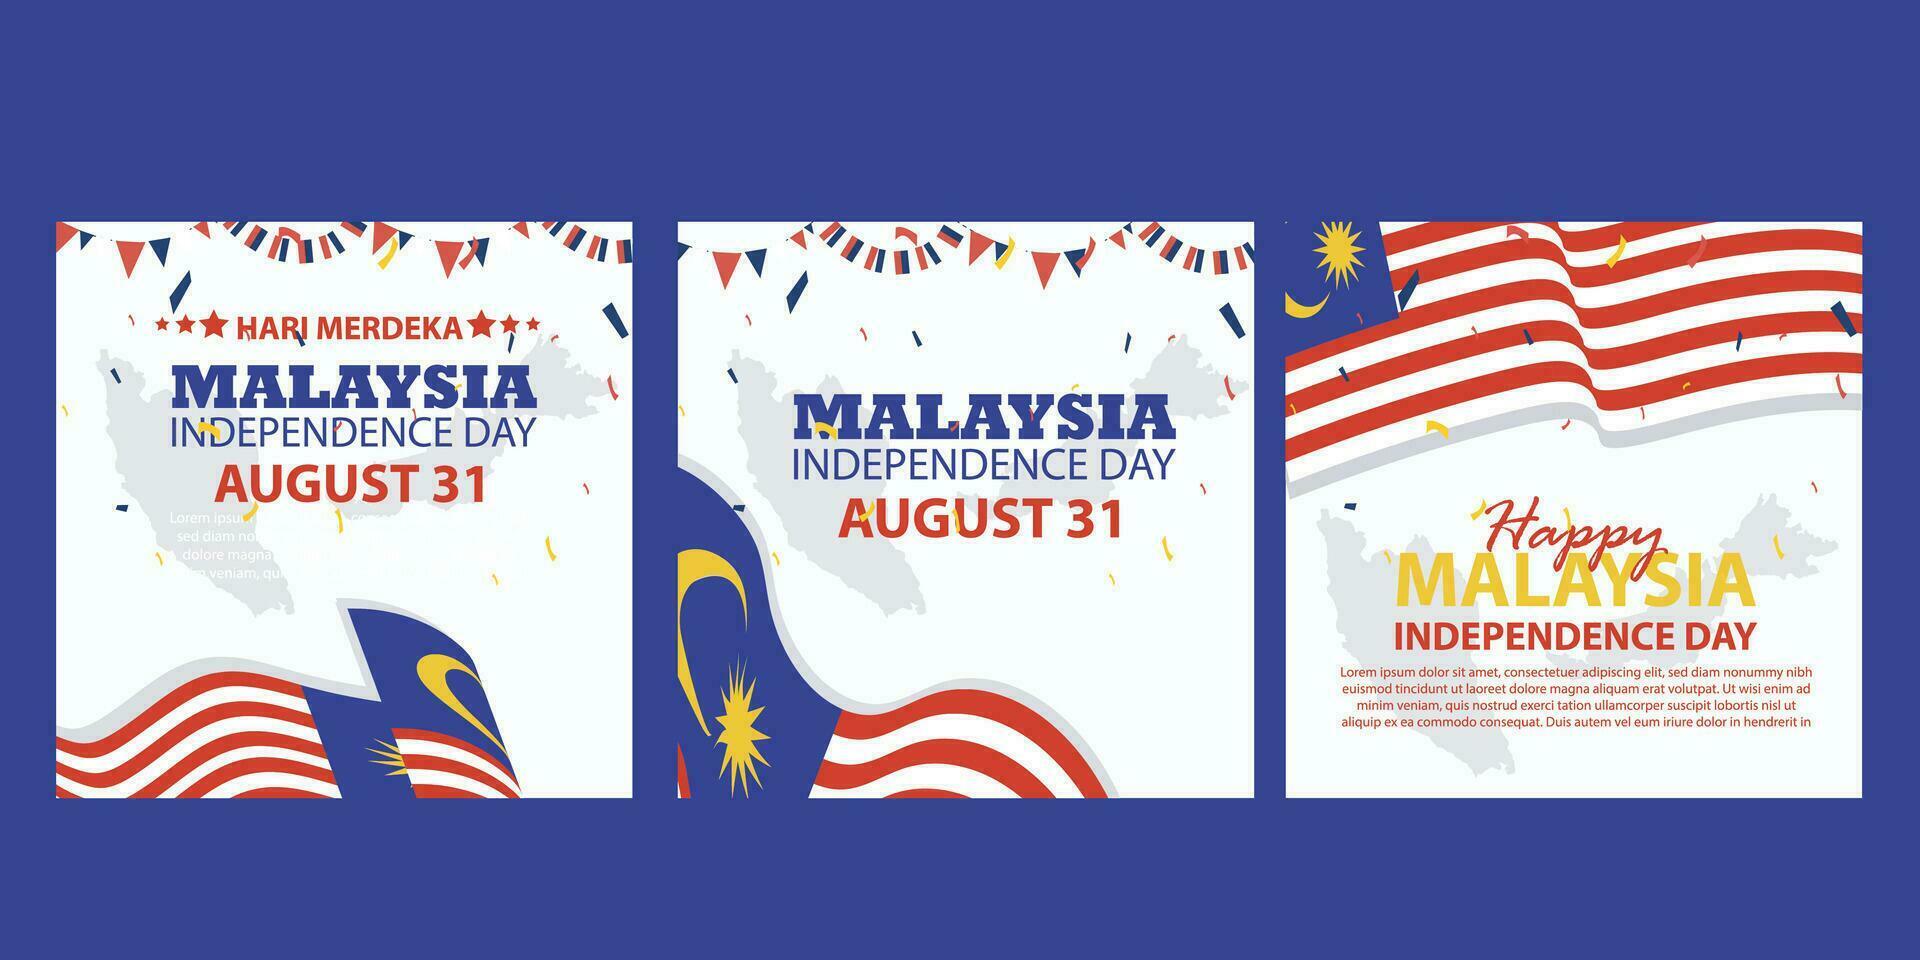 happy independence day Malaysia 31 august. banner, social media post, flyer or greeting card with the theme of blue red struggle and flag of Malaysia. vector illustration